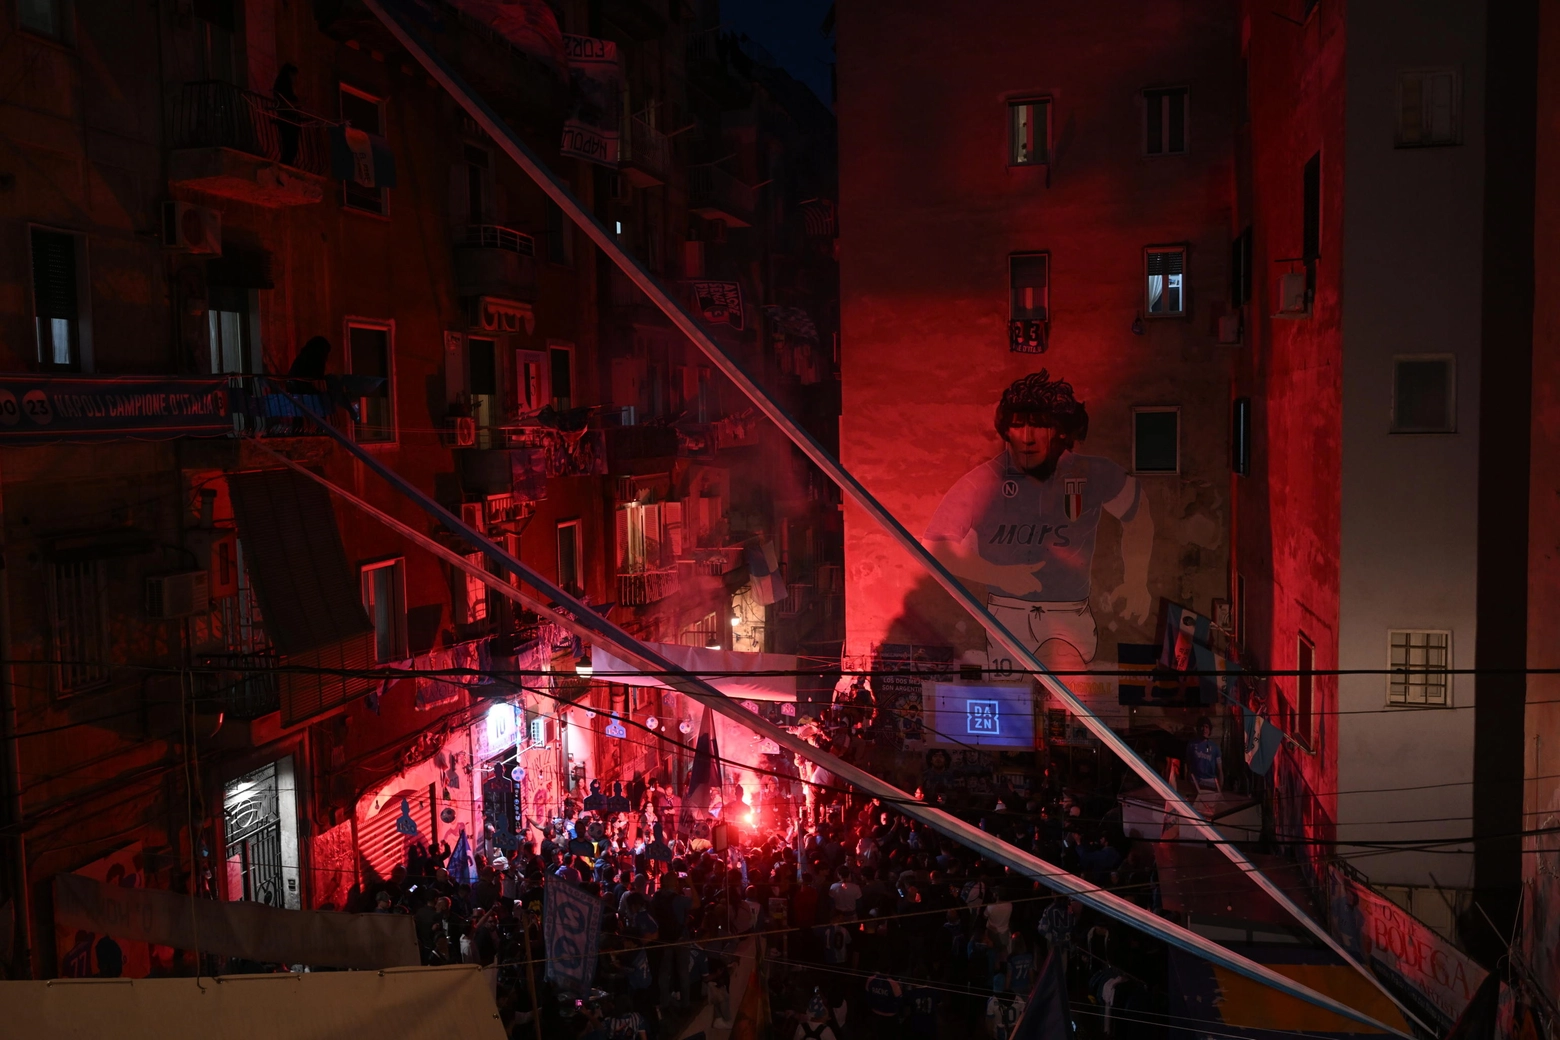 SSC Napoli’s supporters wait for the Italian Serie A soccer match against Udinese Calcio in the centre of Naples, Italy, 04 May 2023.
ANSA/CIRO FUSCO